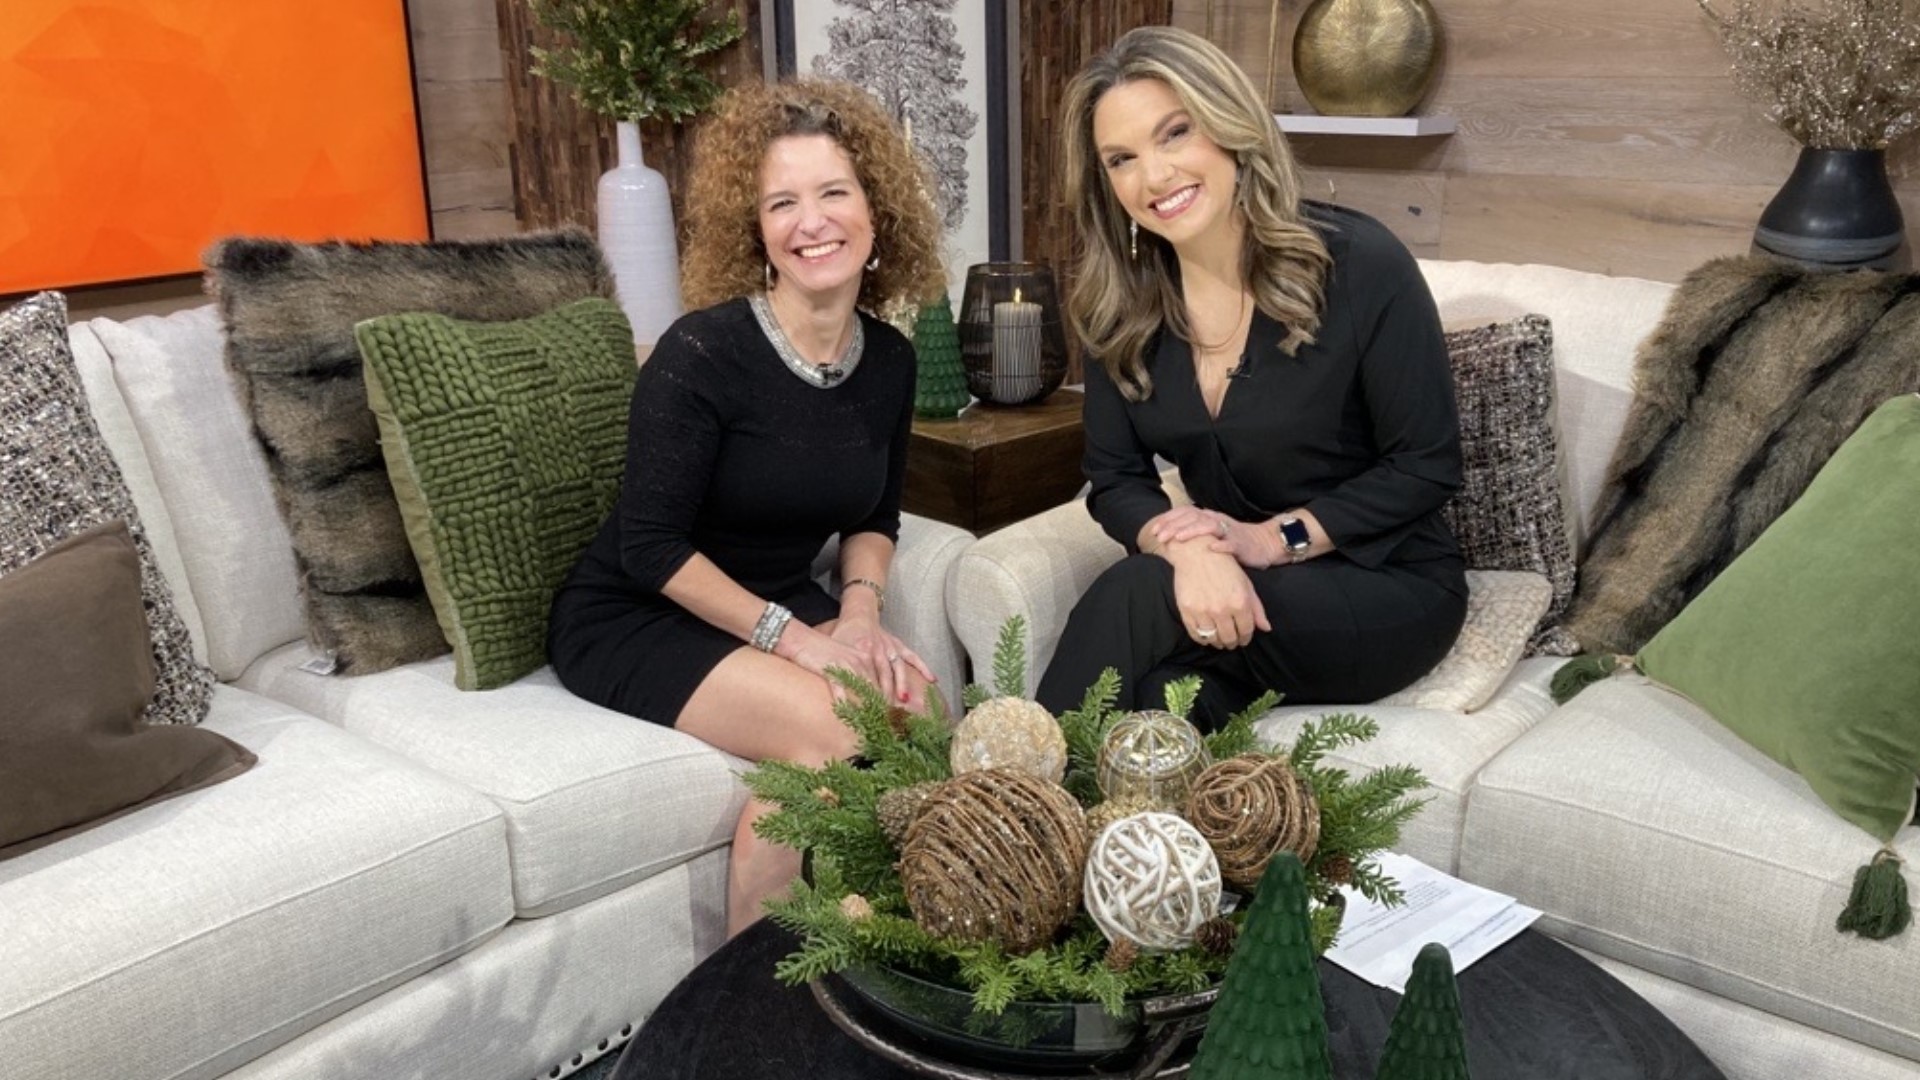 Dr. Tiana Tsitis shares a few ways to look your best this holiday season. Sponsored by Rejuvenation MD.